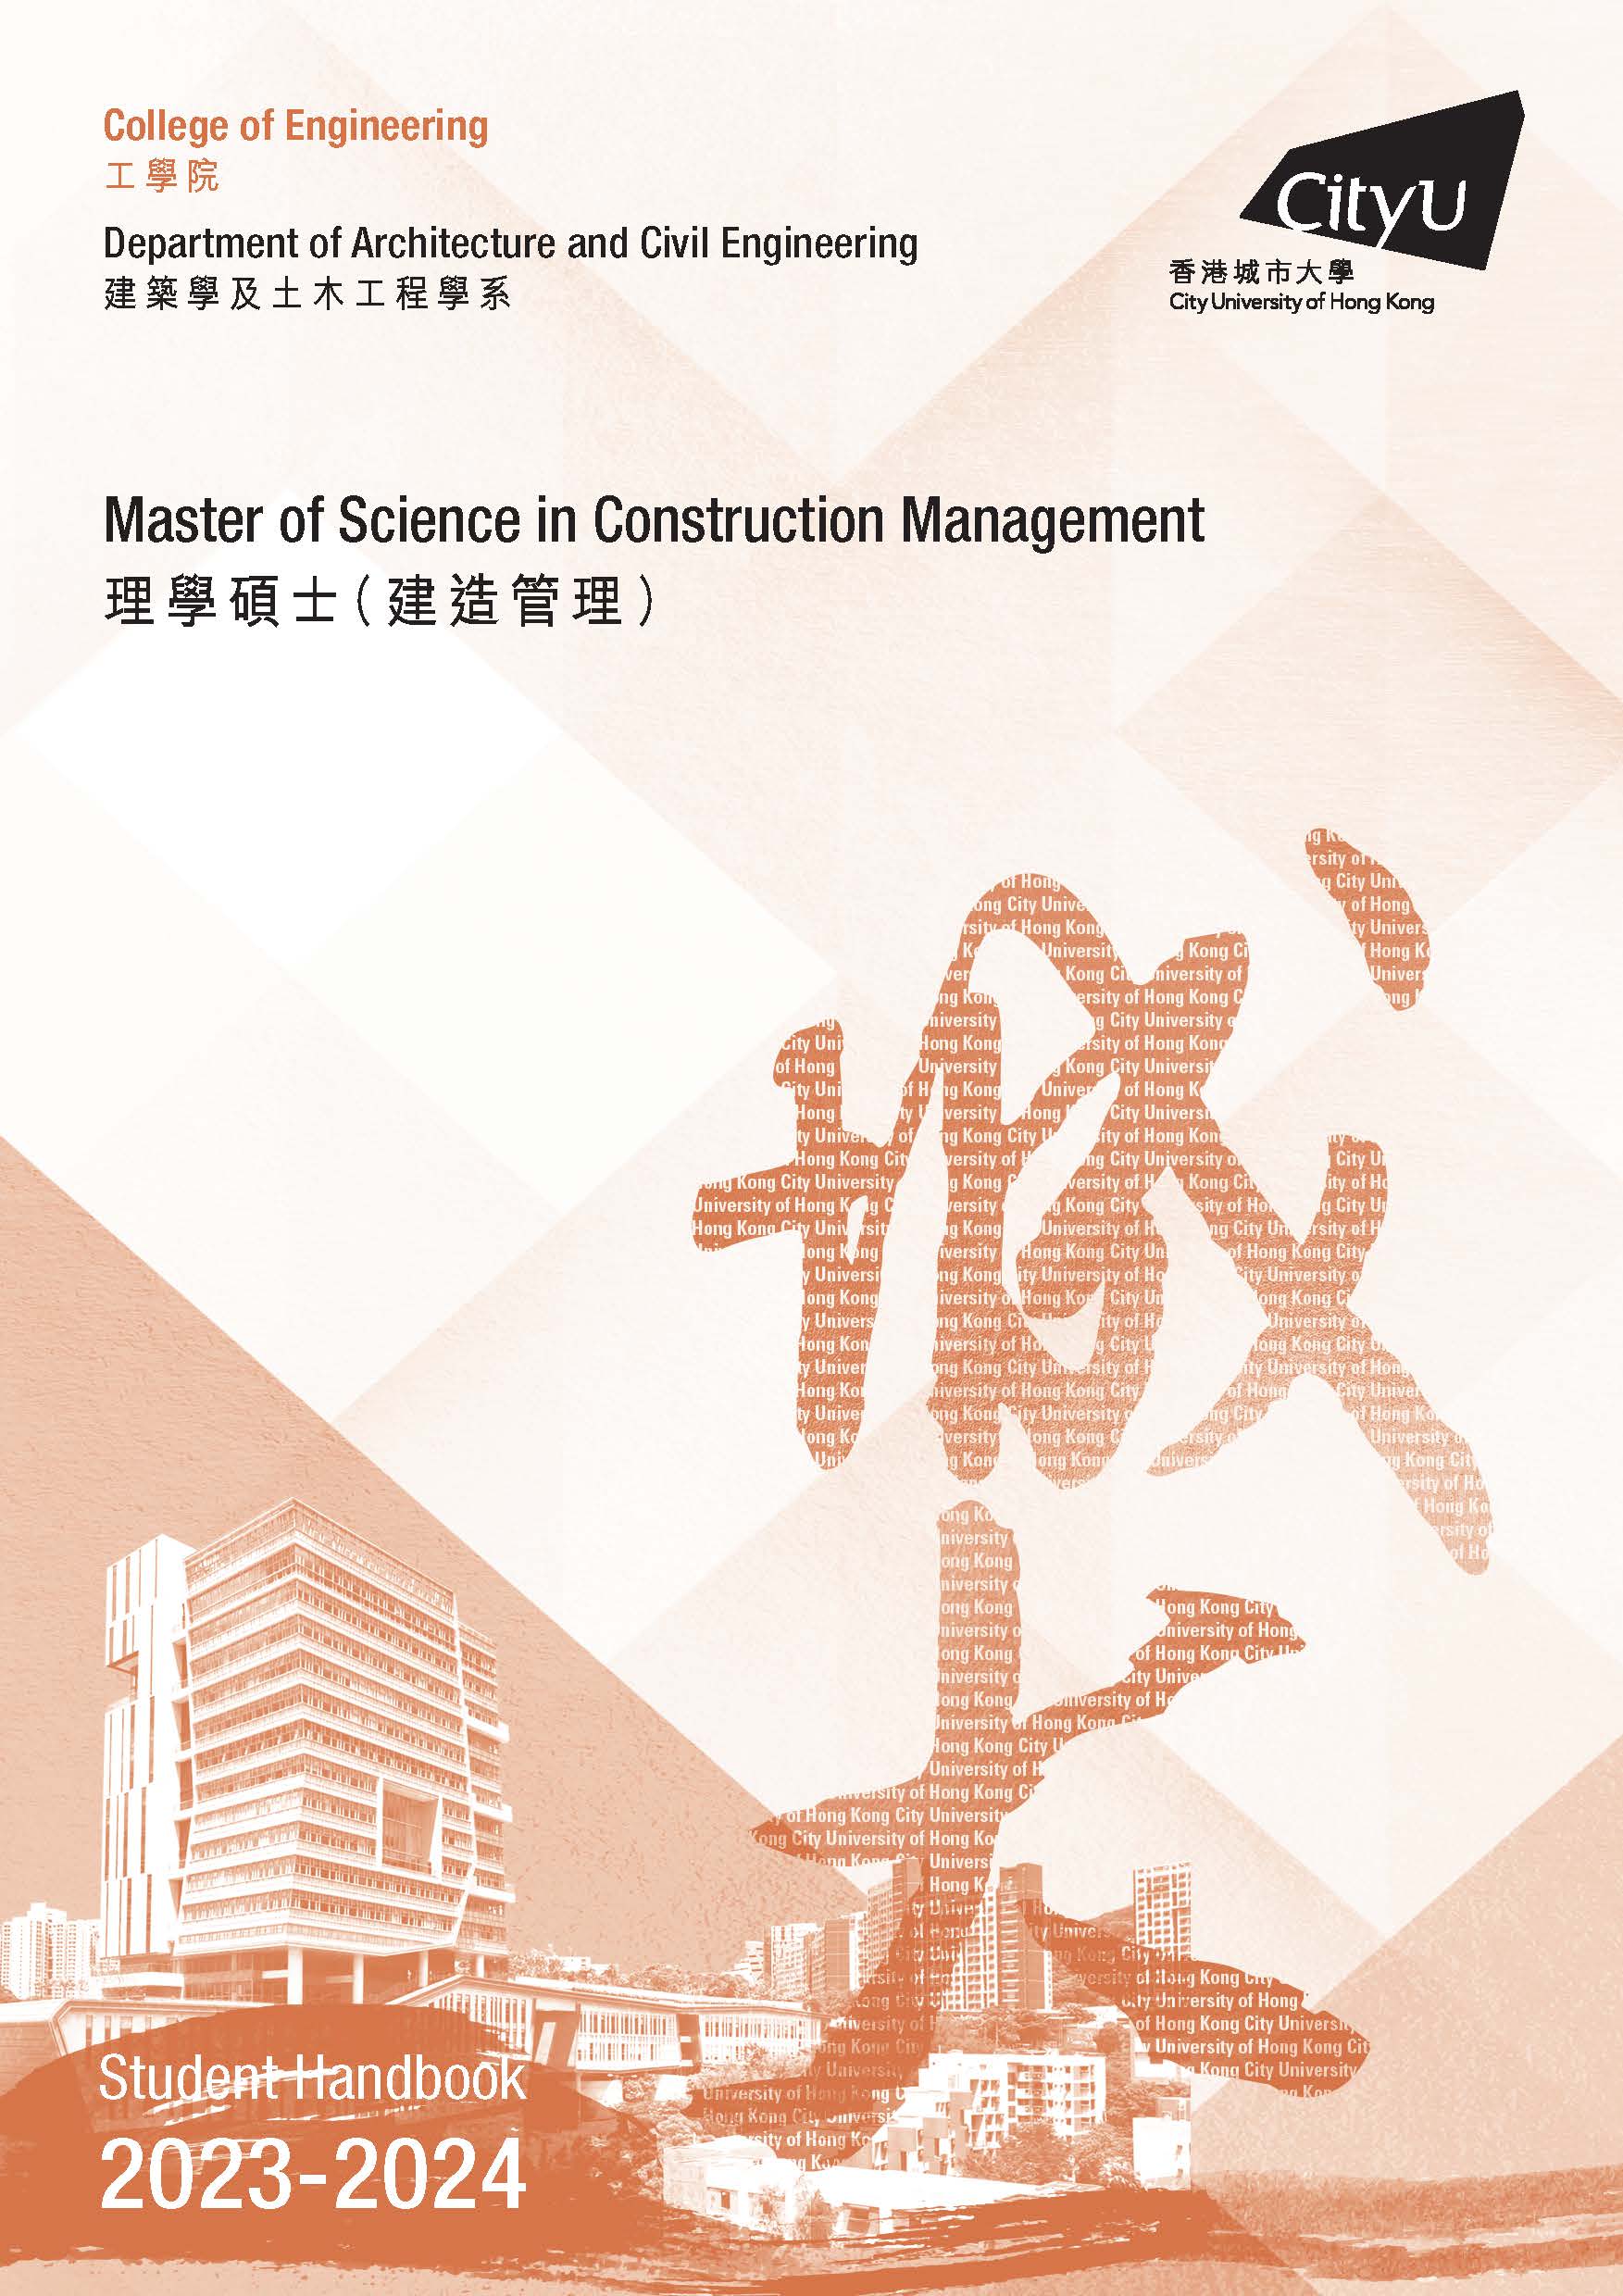 Student Handbook 2023/2024 (Master of Science in Construction Management)